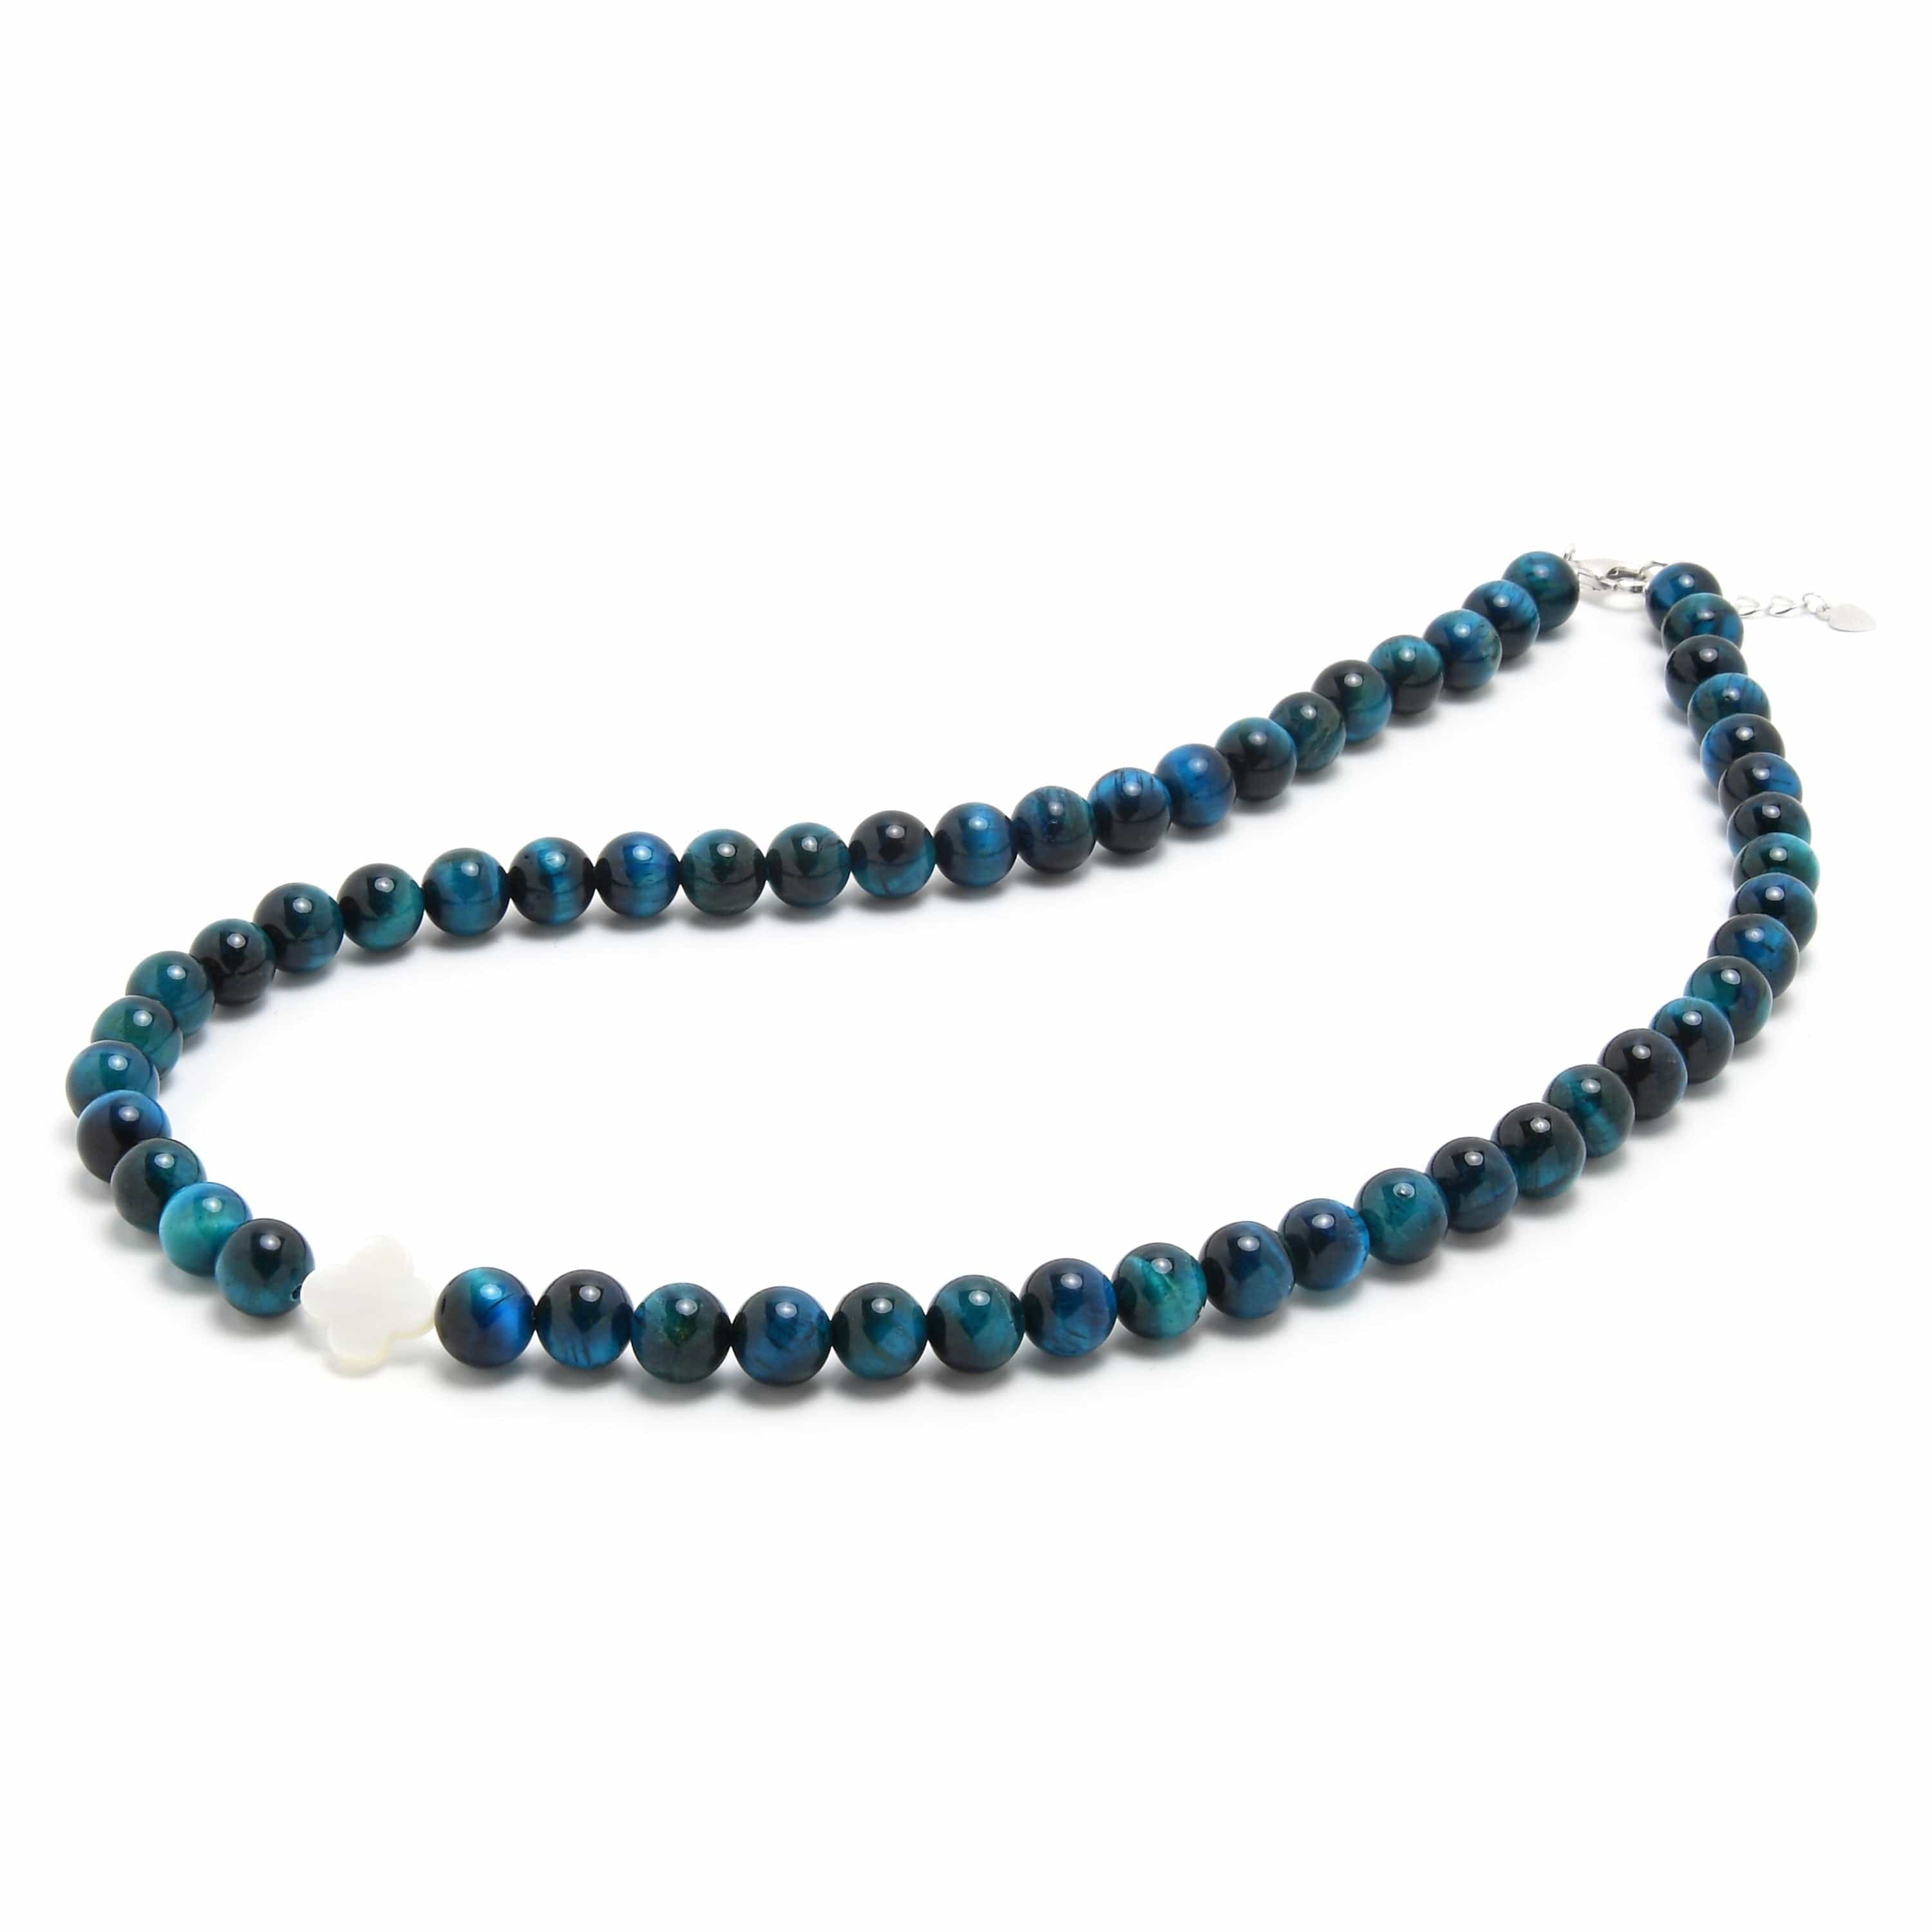 Kalifano Gemstone Bracelets 6mm Blue Tiger Eye Necklace with Mother of Pearl Clover Pendant N6TE-AQ-CL-MOP